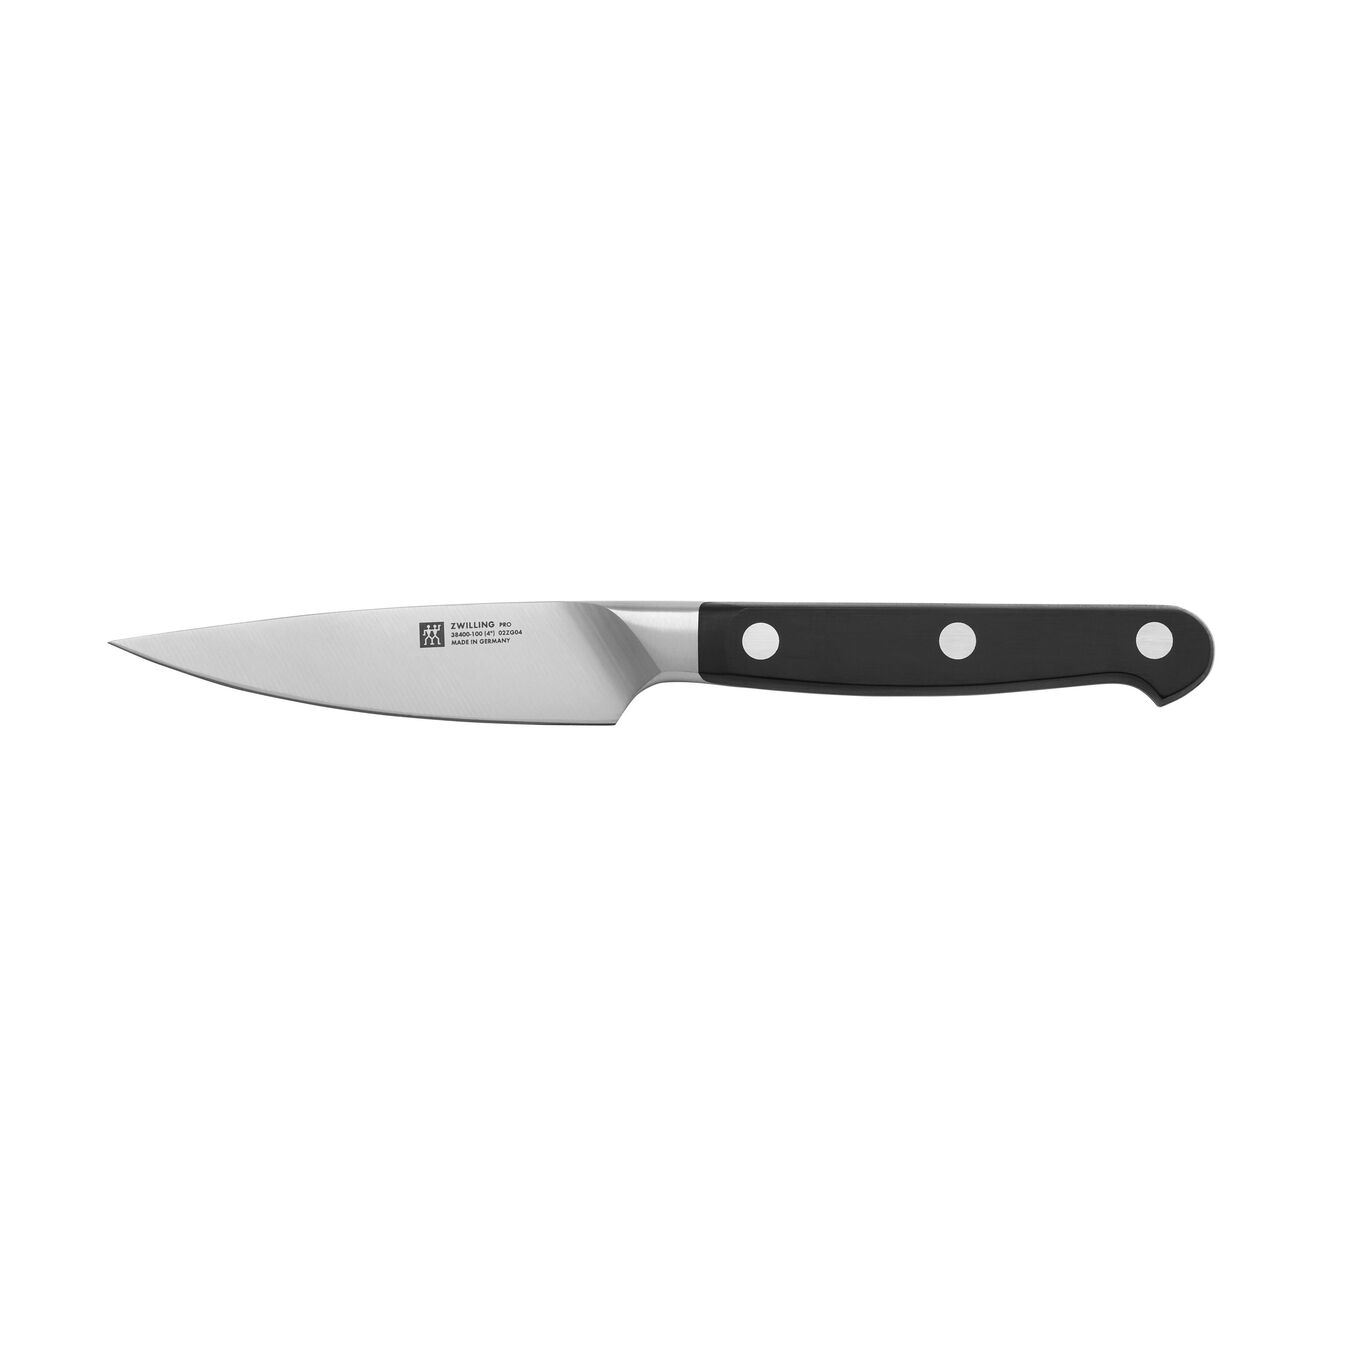 4 inch Paring knife - Visual Imperfections,,large 2